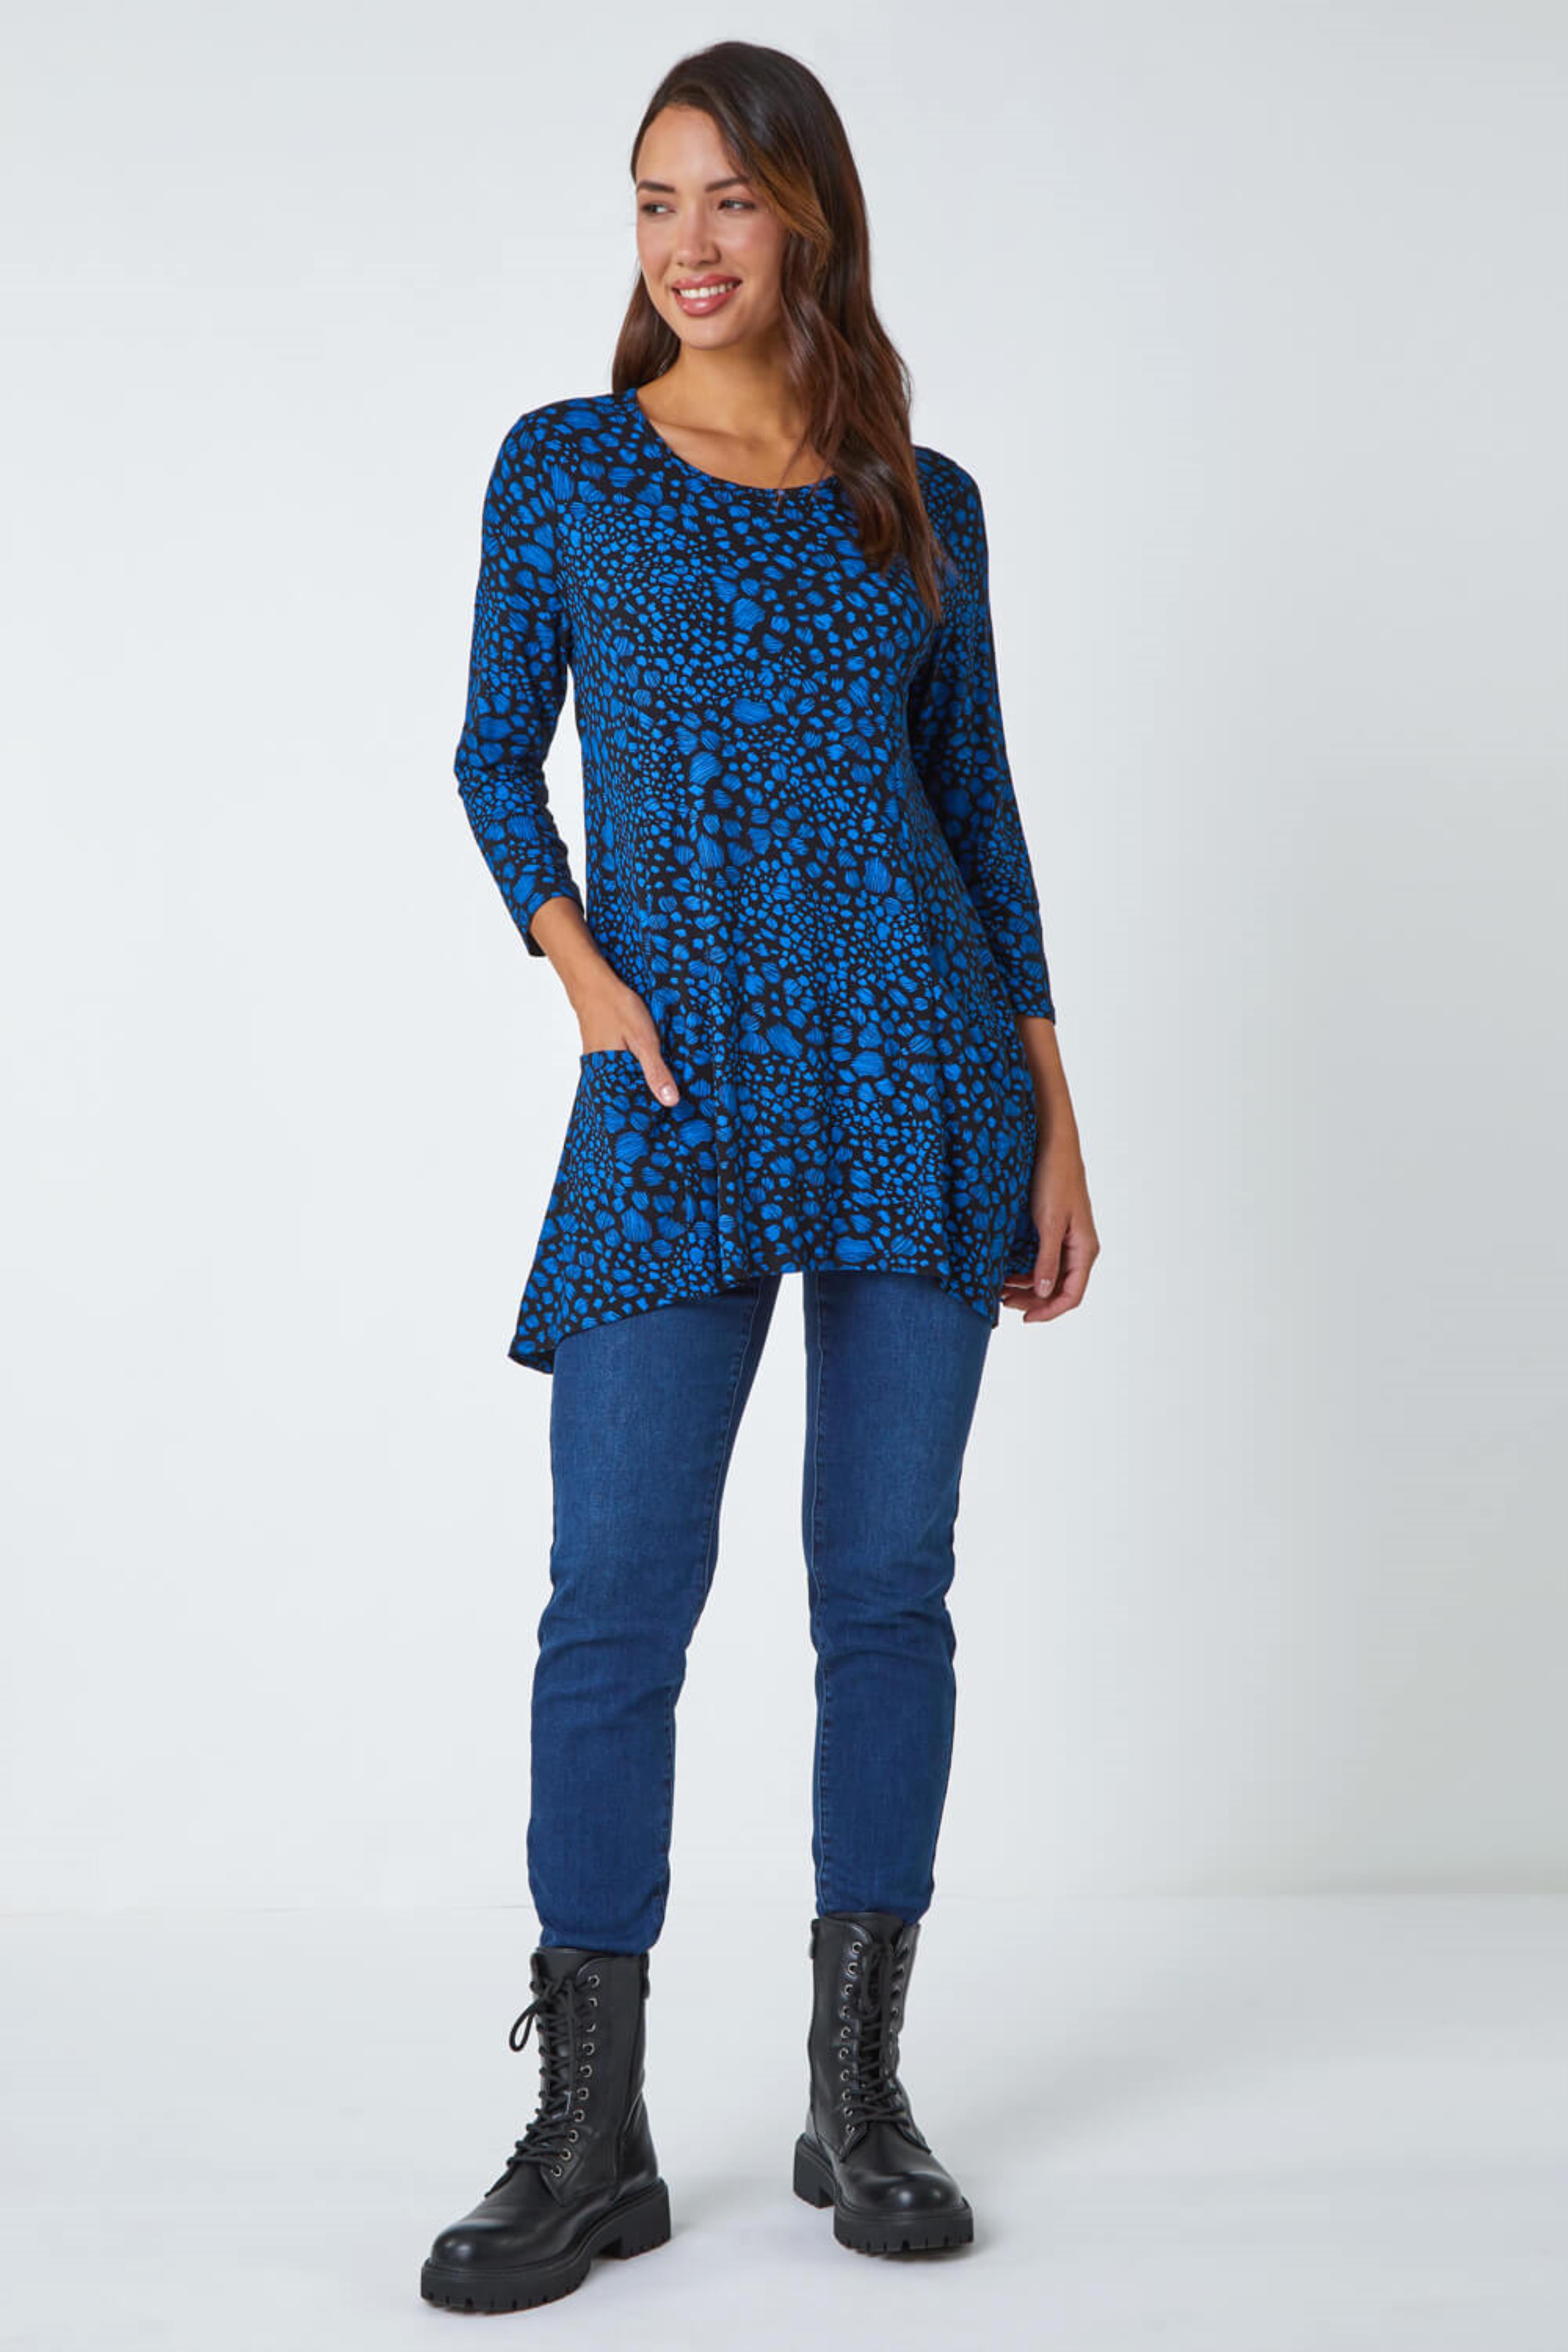 Blue Spot Print Stretch Swing Top , Image 2 of 5